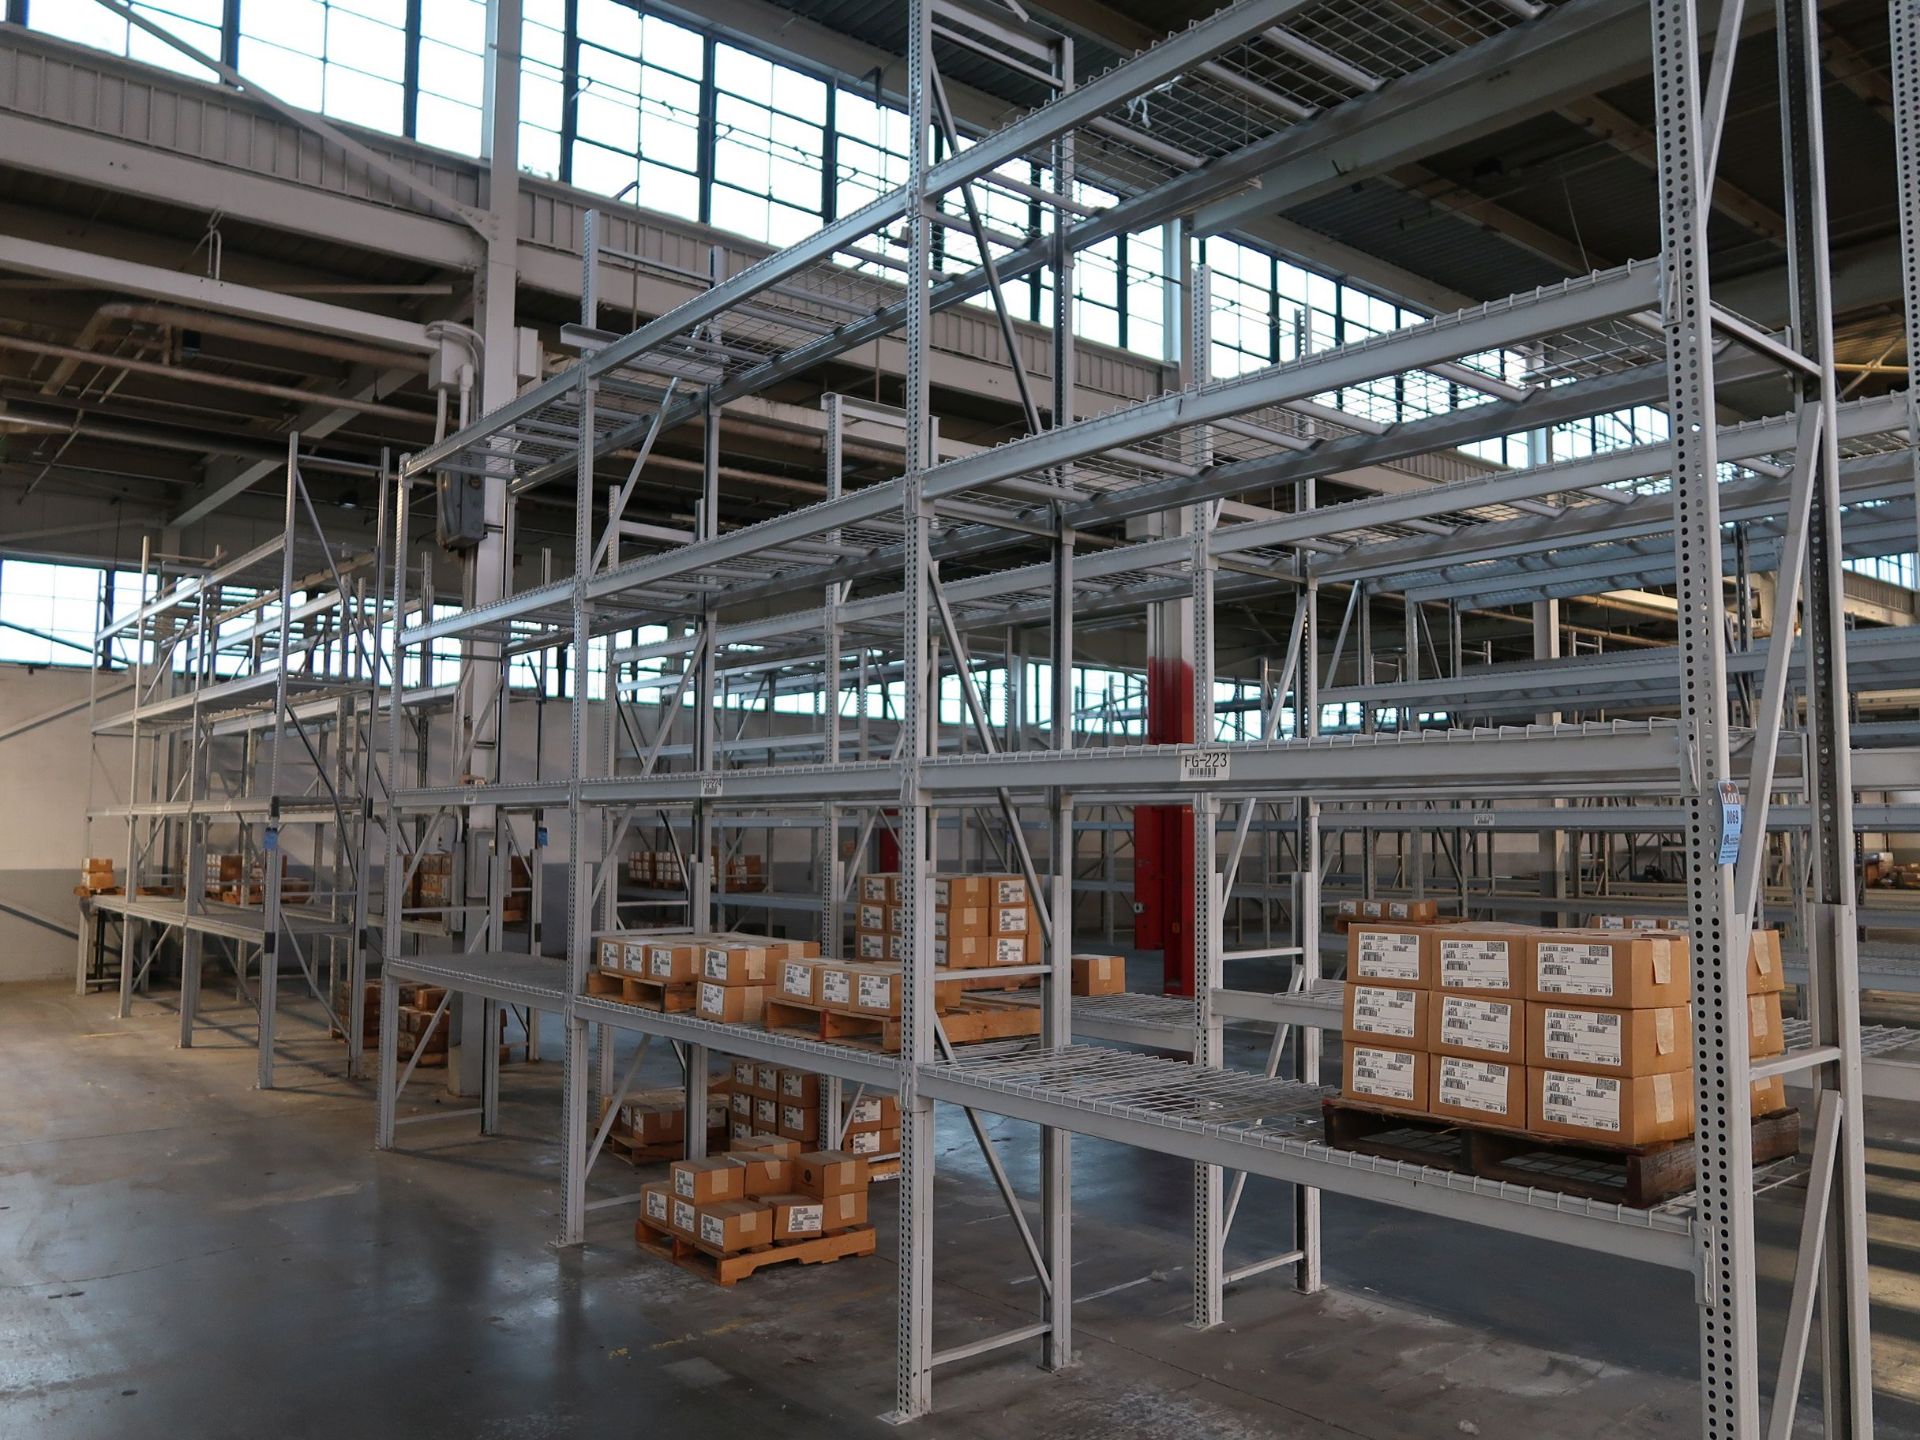 SECTIONS 28" X 96" X 180" POWER LOCK ADJUSTABLE BEAM PALLET RACKS WITH (8) 28" X 180" UPRIGHTS, (48)